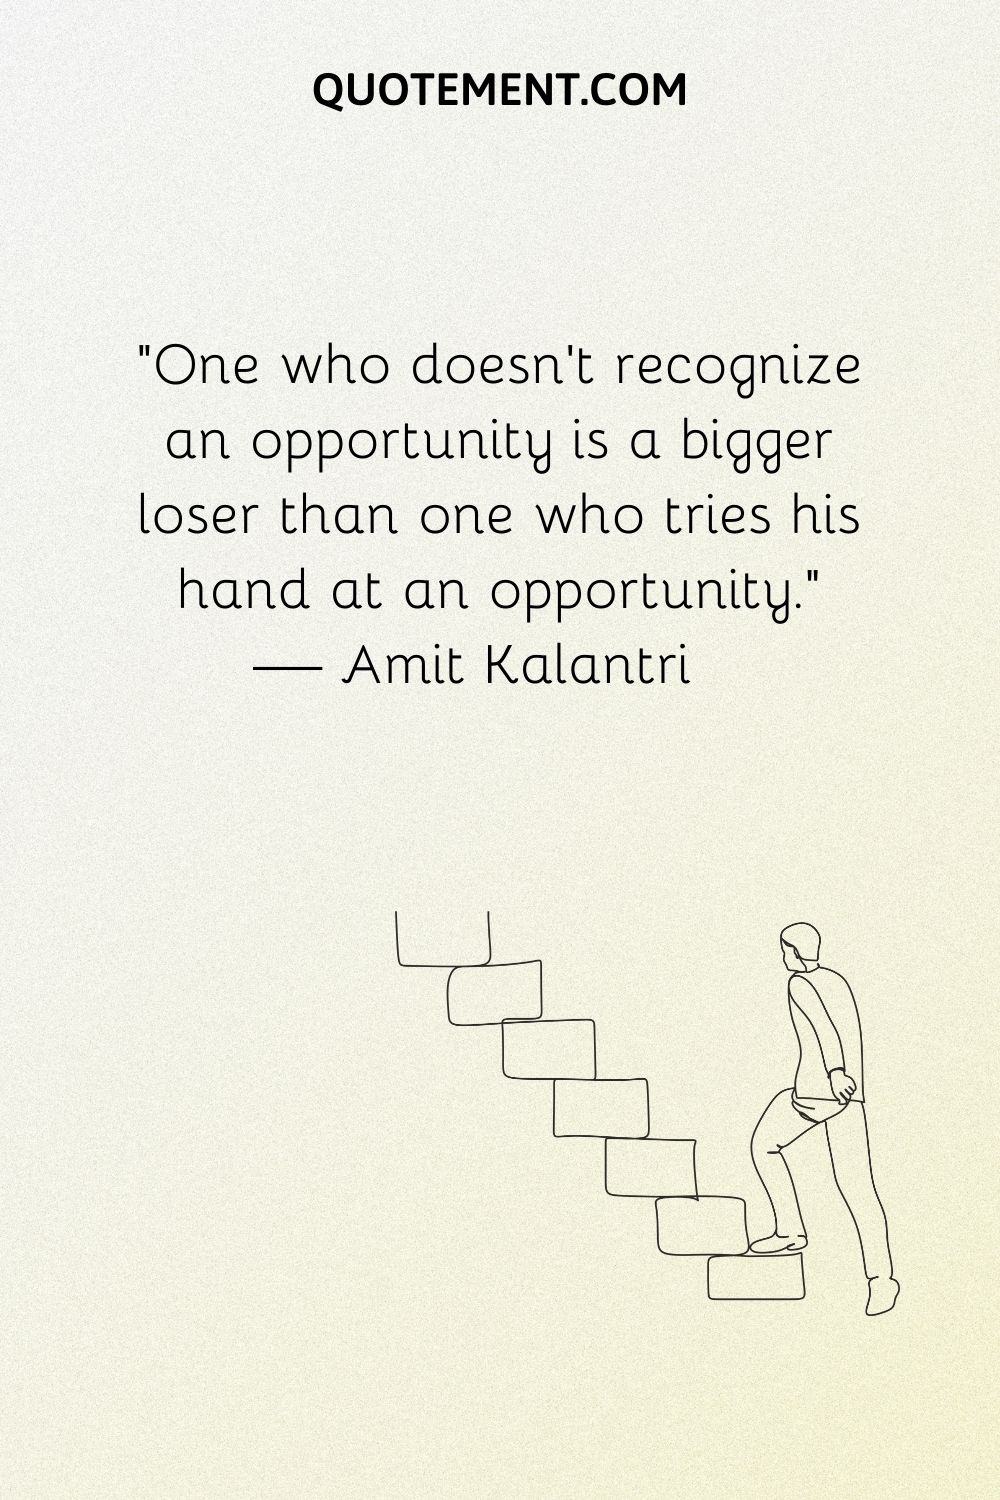 One who doesn’t recognize an opportunity is a bigger loser than one who tries his hand at an opportunity